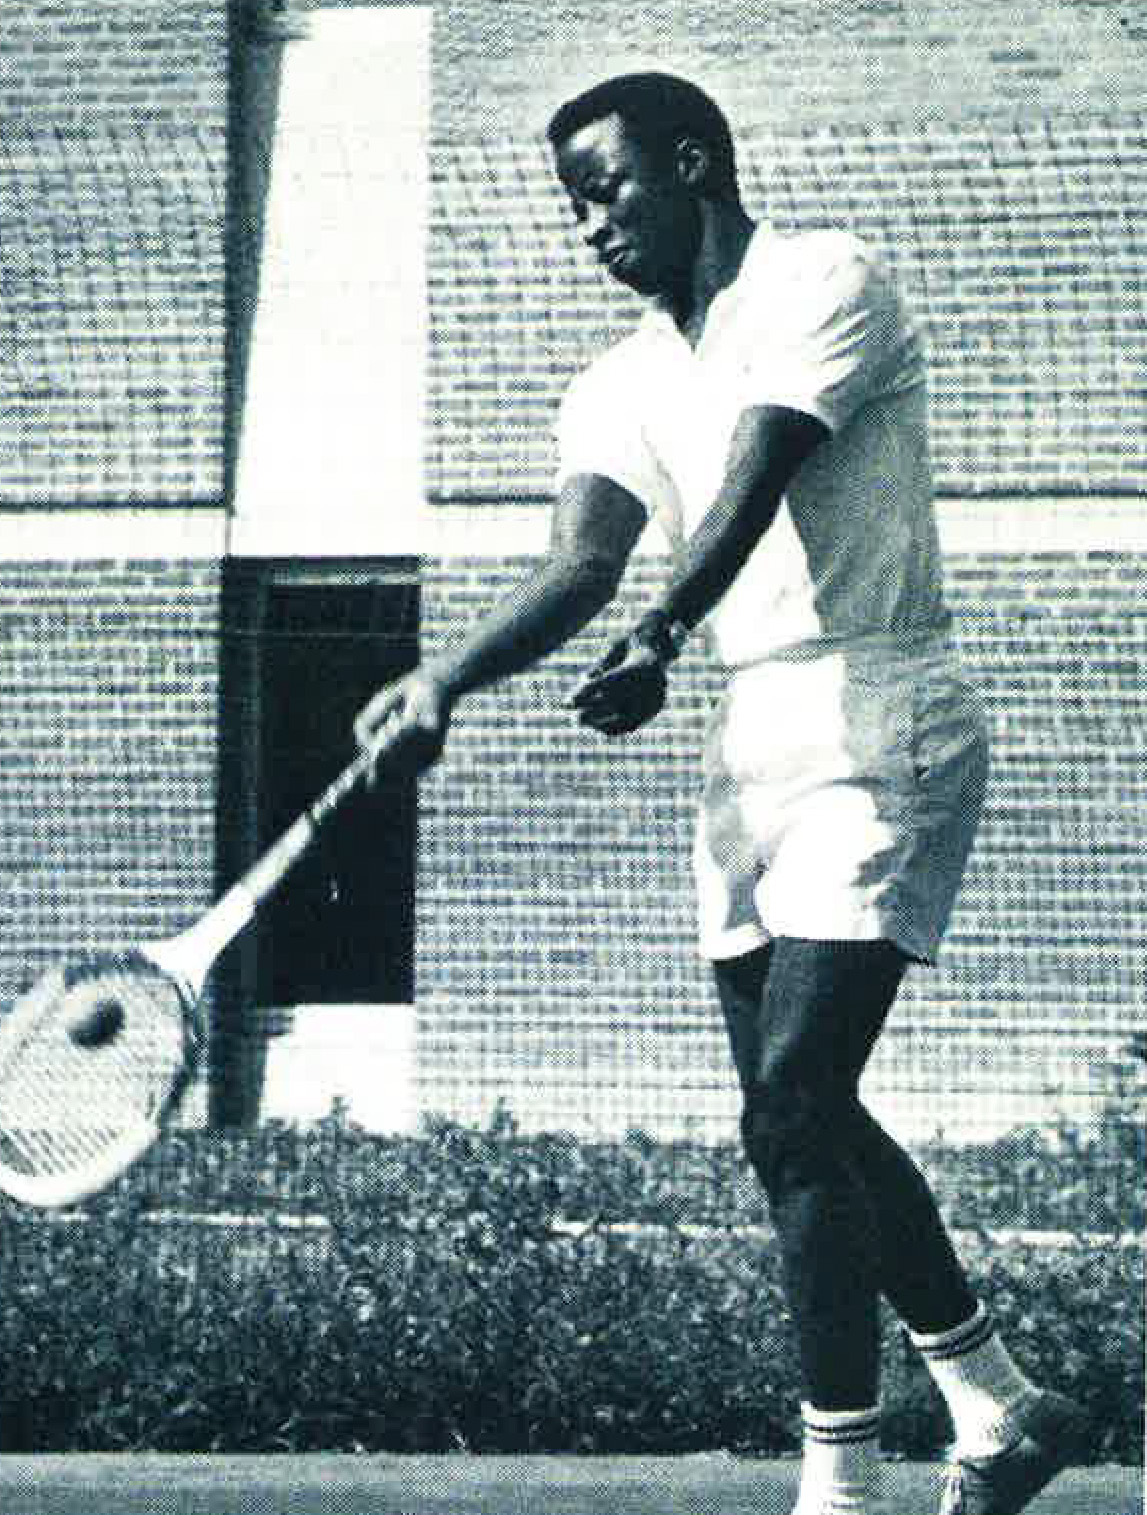 A young Francis Mustapha plays tennis